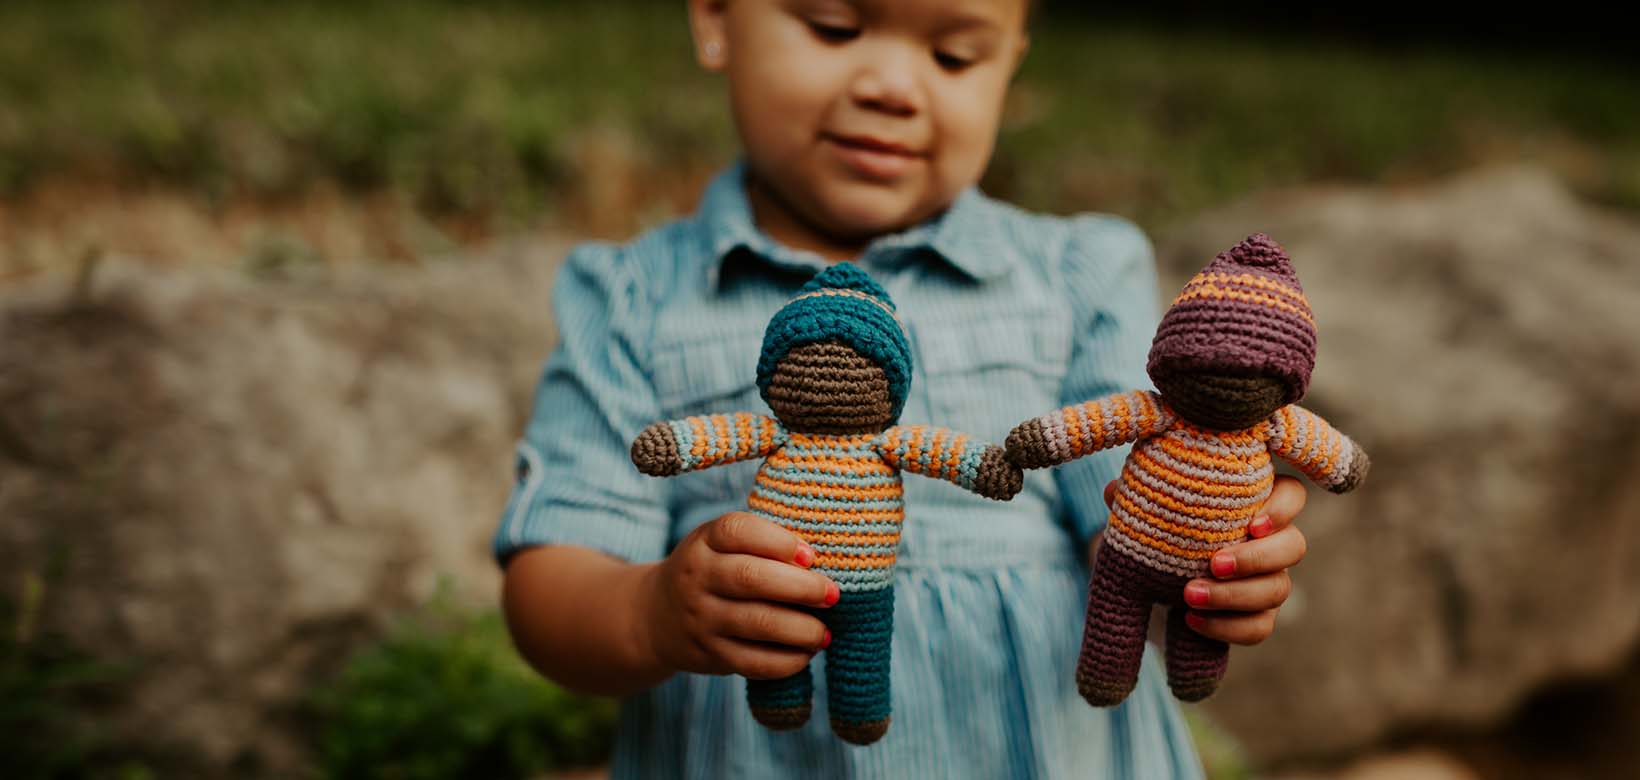 Girl holding Pixie Knitted Doll Toy Rattles.